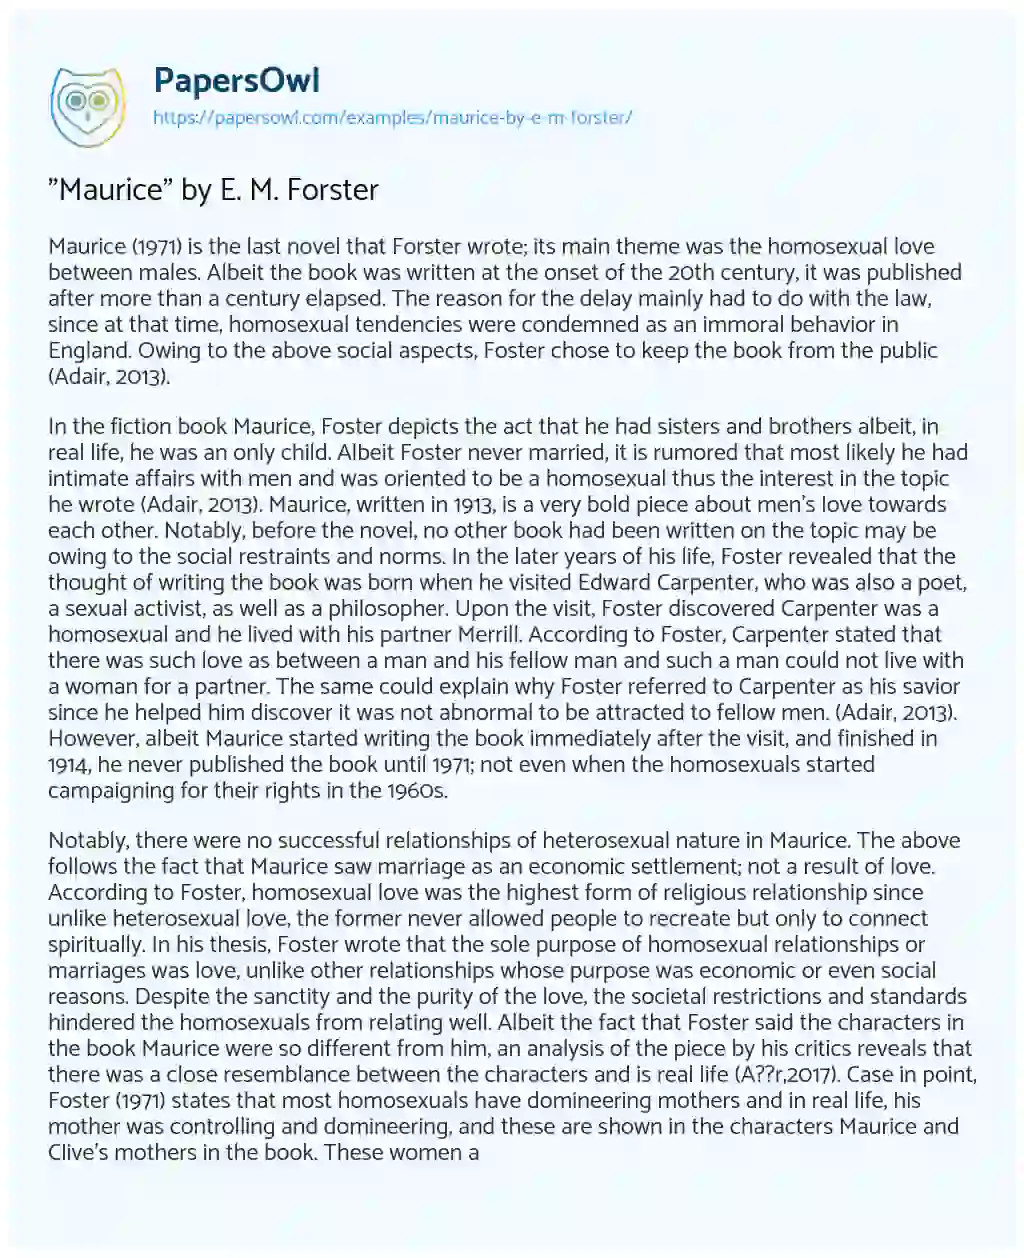 “Maurice” by E. M. Forster essay